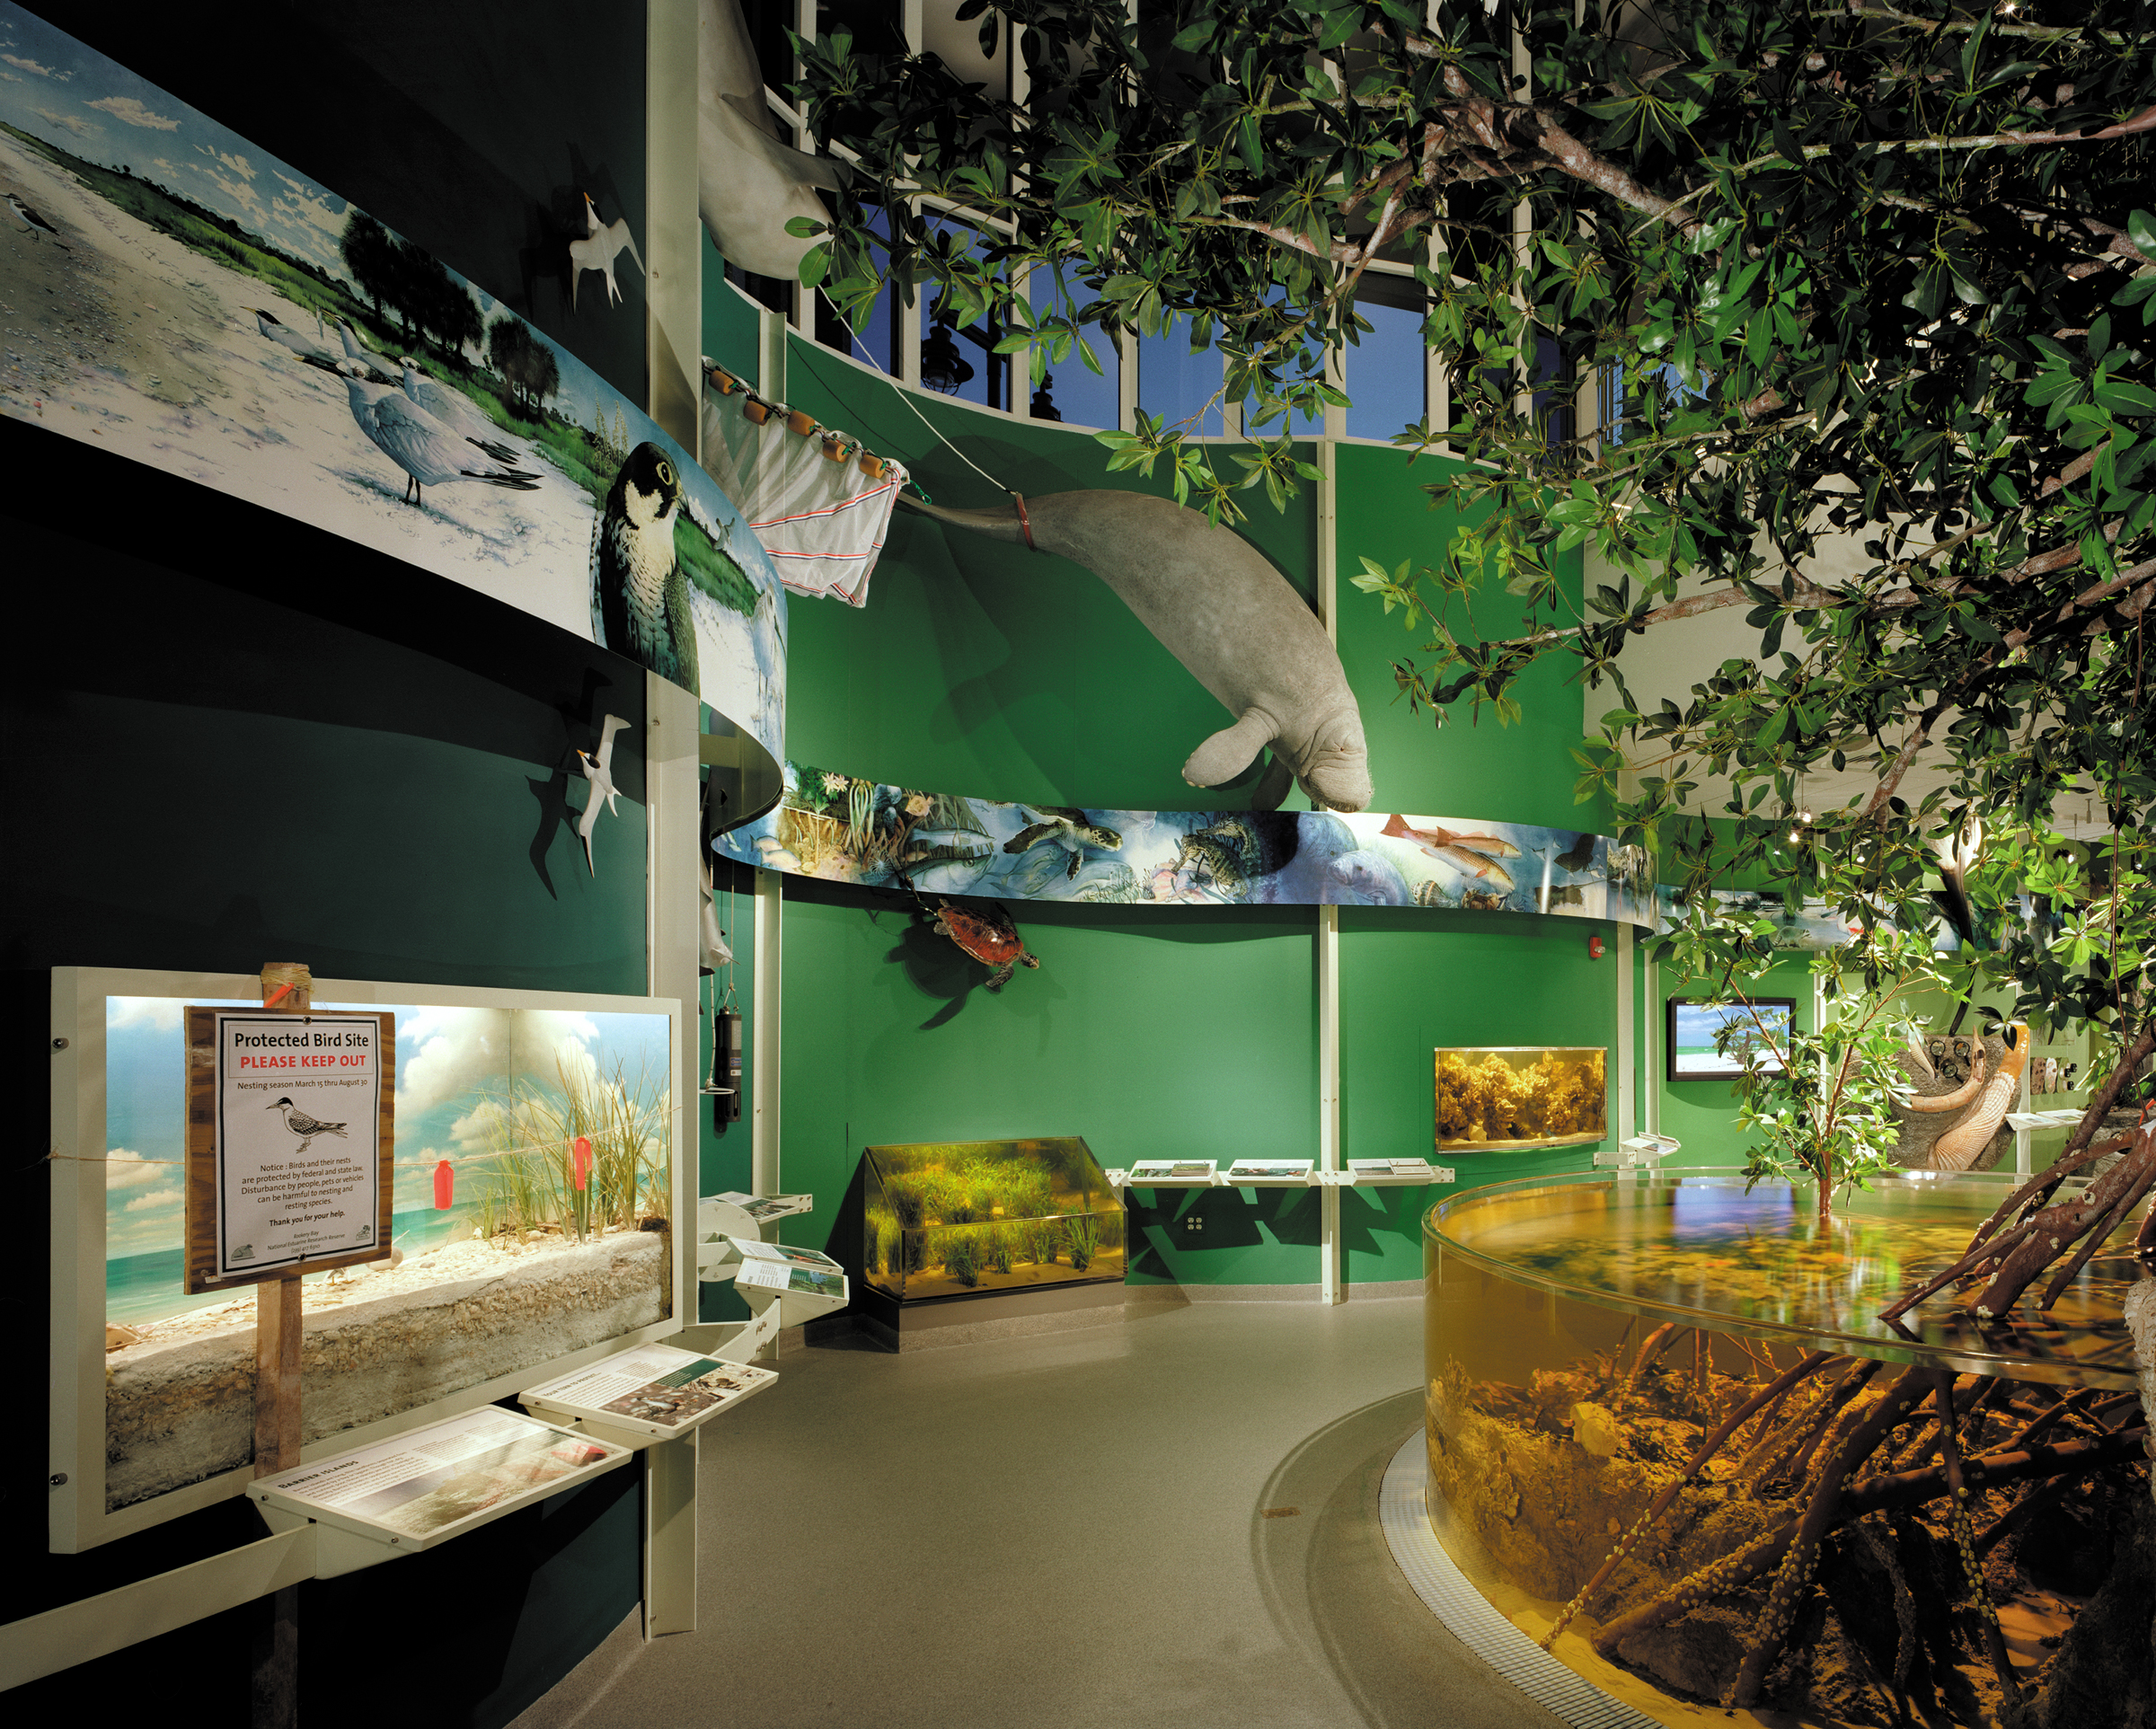 Project image 1 for Exhibits at Rookery Bay National Estuarine Reserve, National Oceanographic and Atmospheric Administration